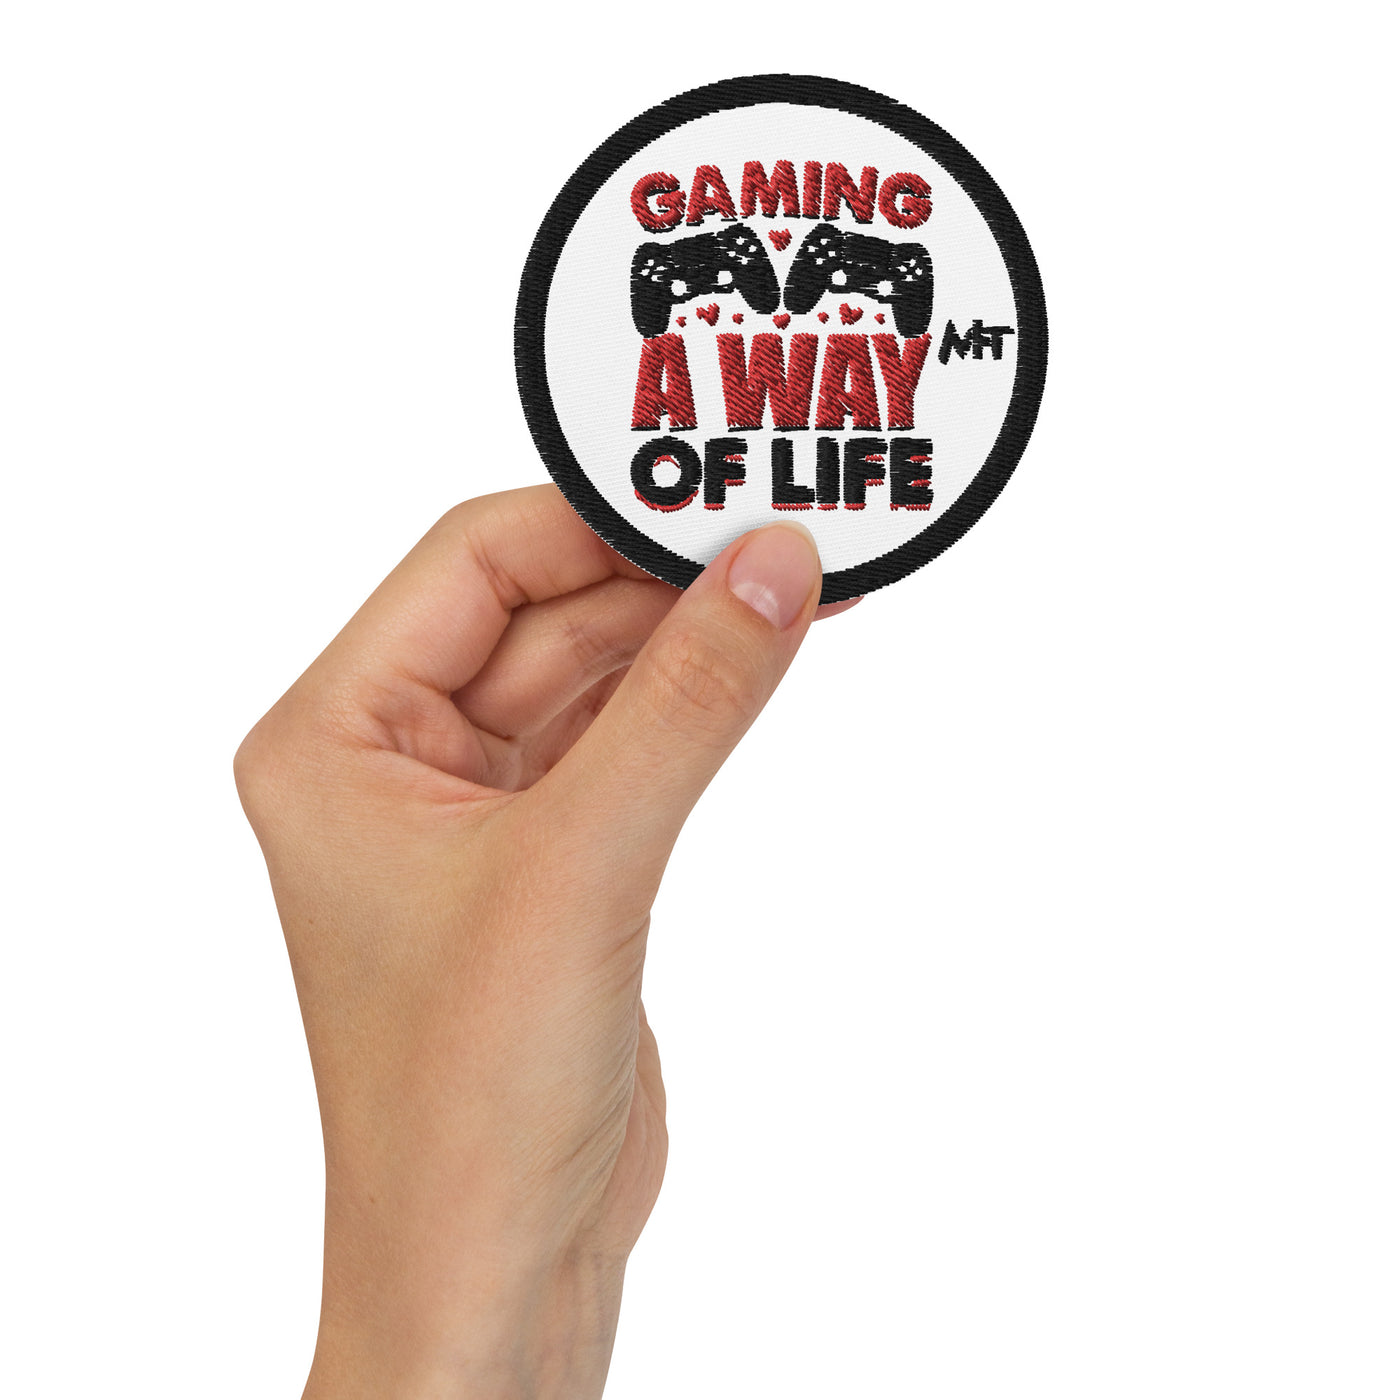 Gaming is a way of life - Embroidered patches